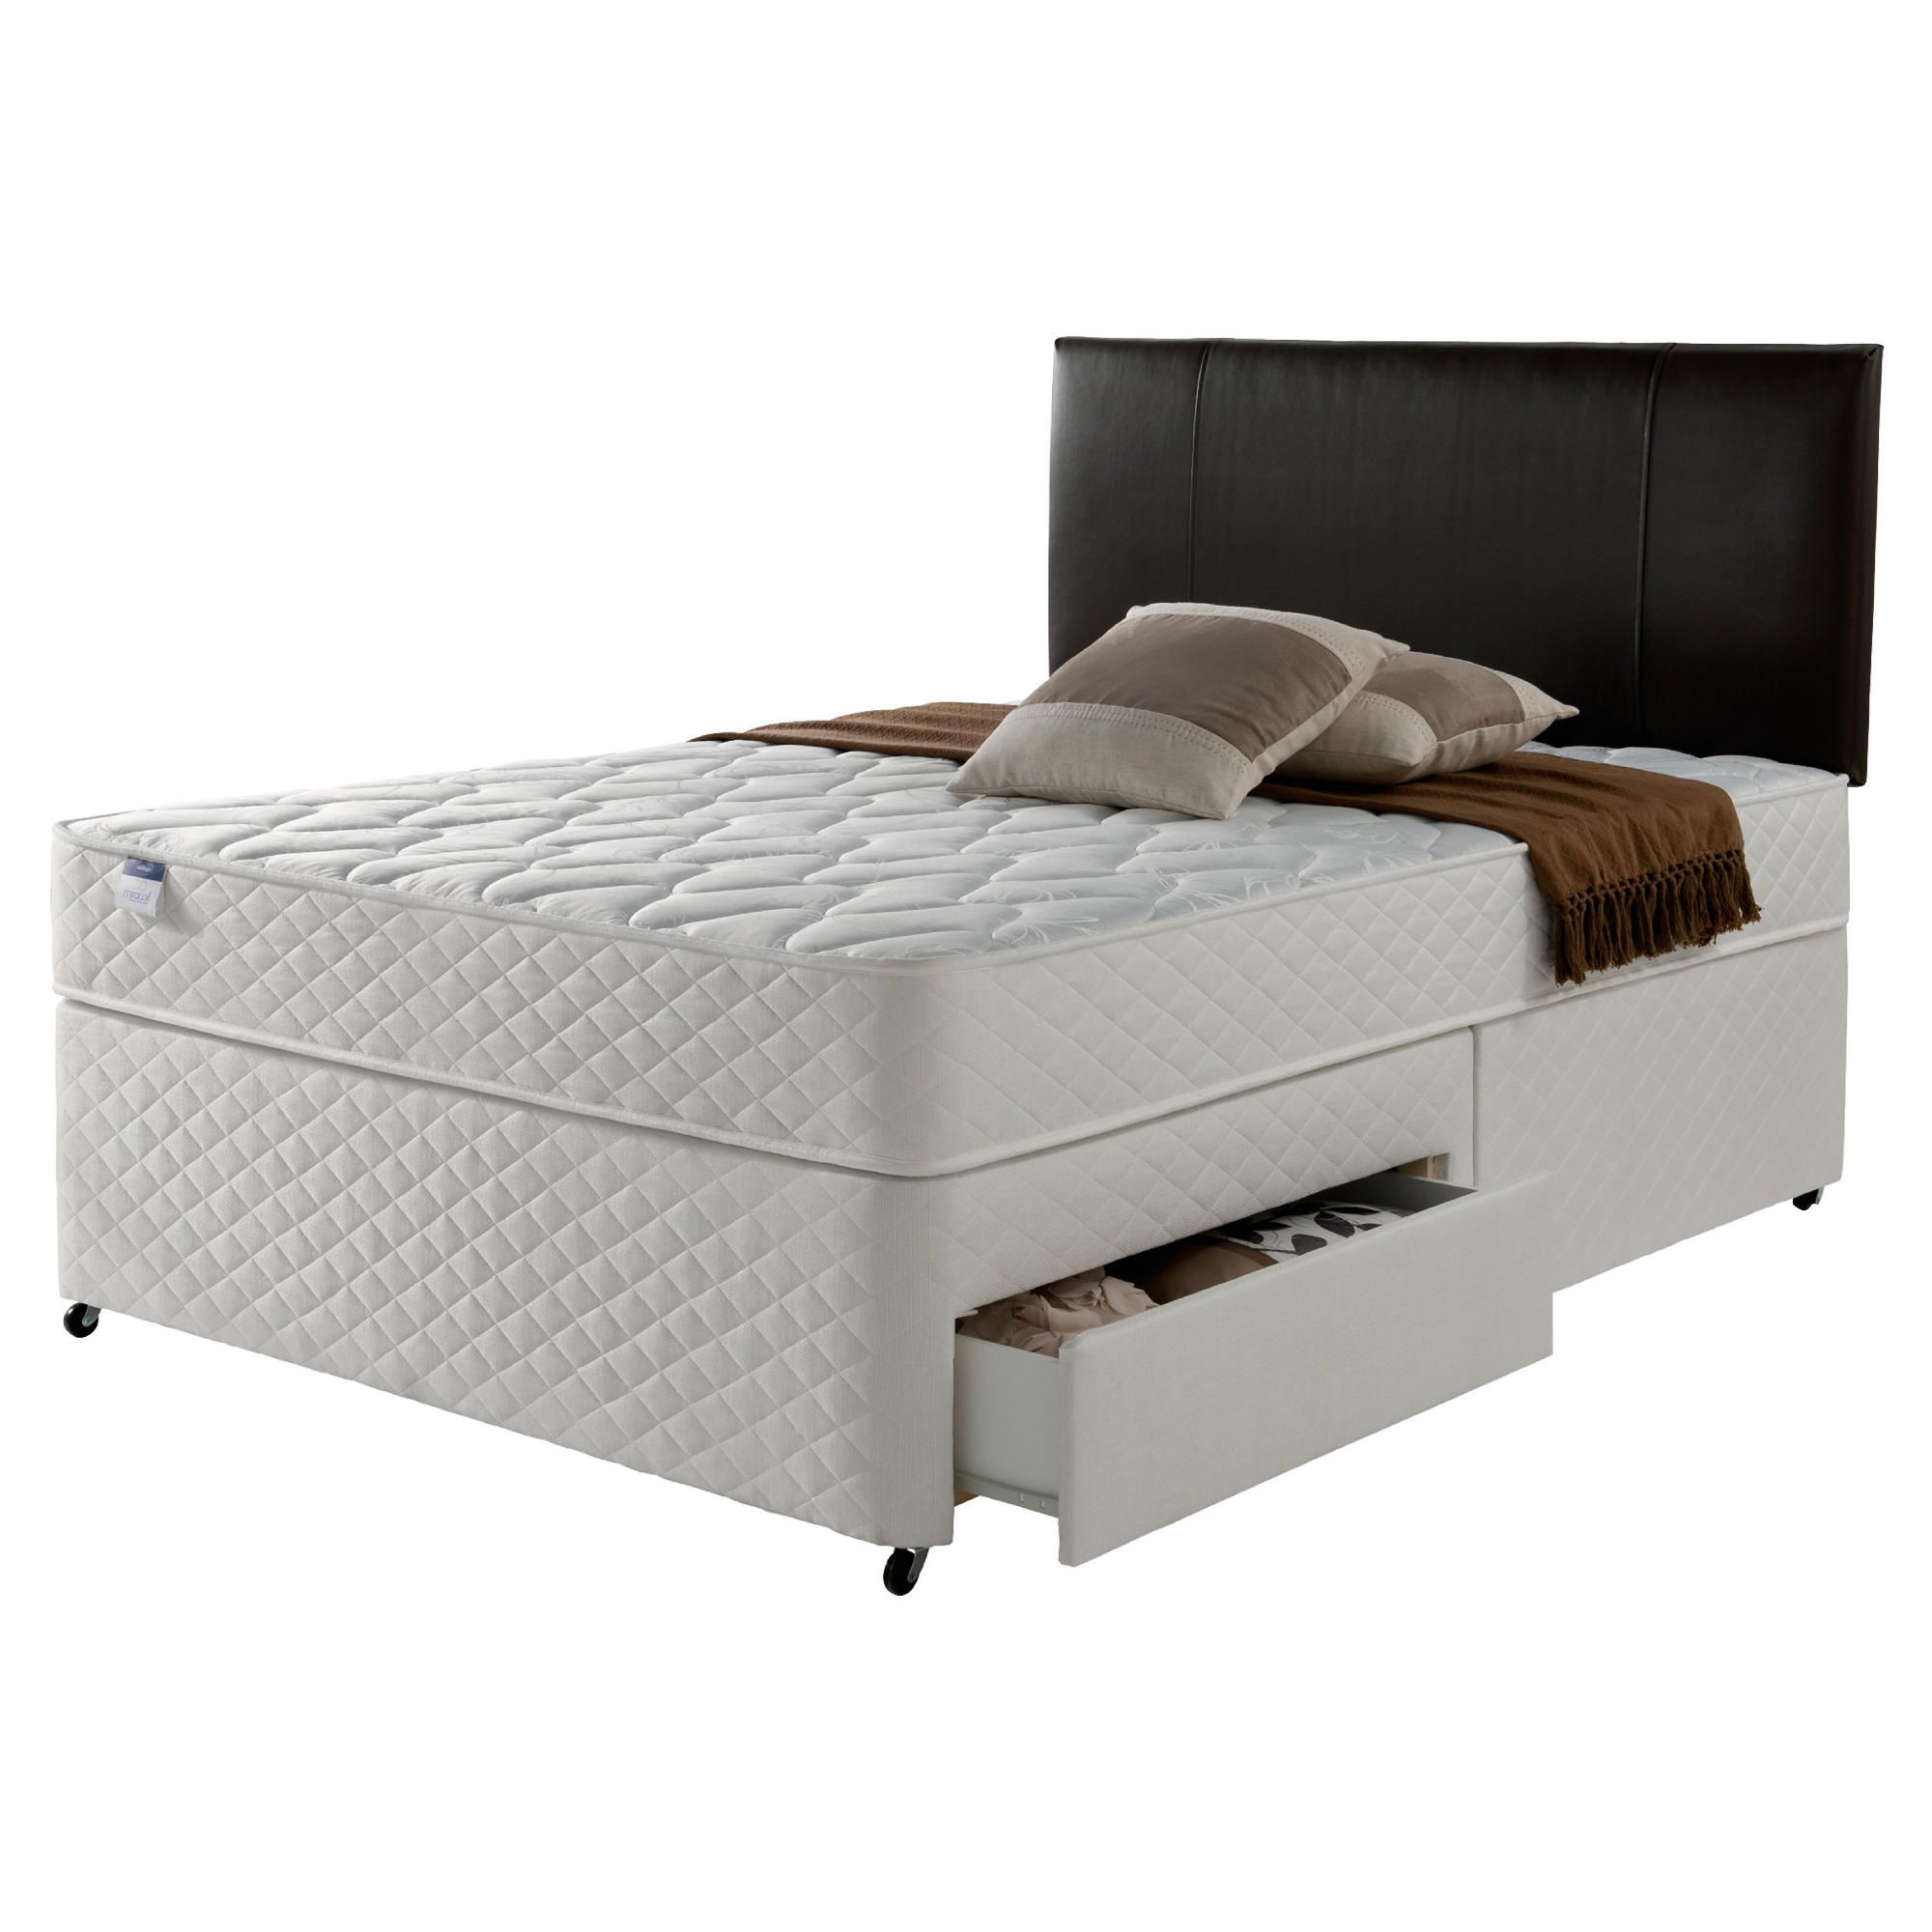 Silentnight Miracoil Comfort Micro Quilt 4 Drawer Divan, Double at Tesco Direct